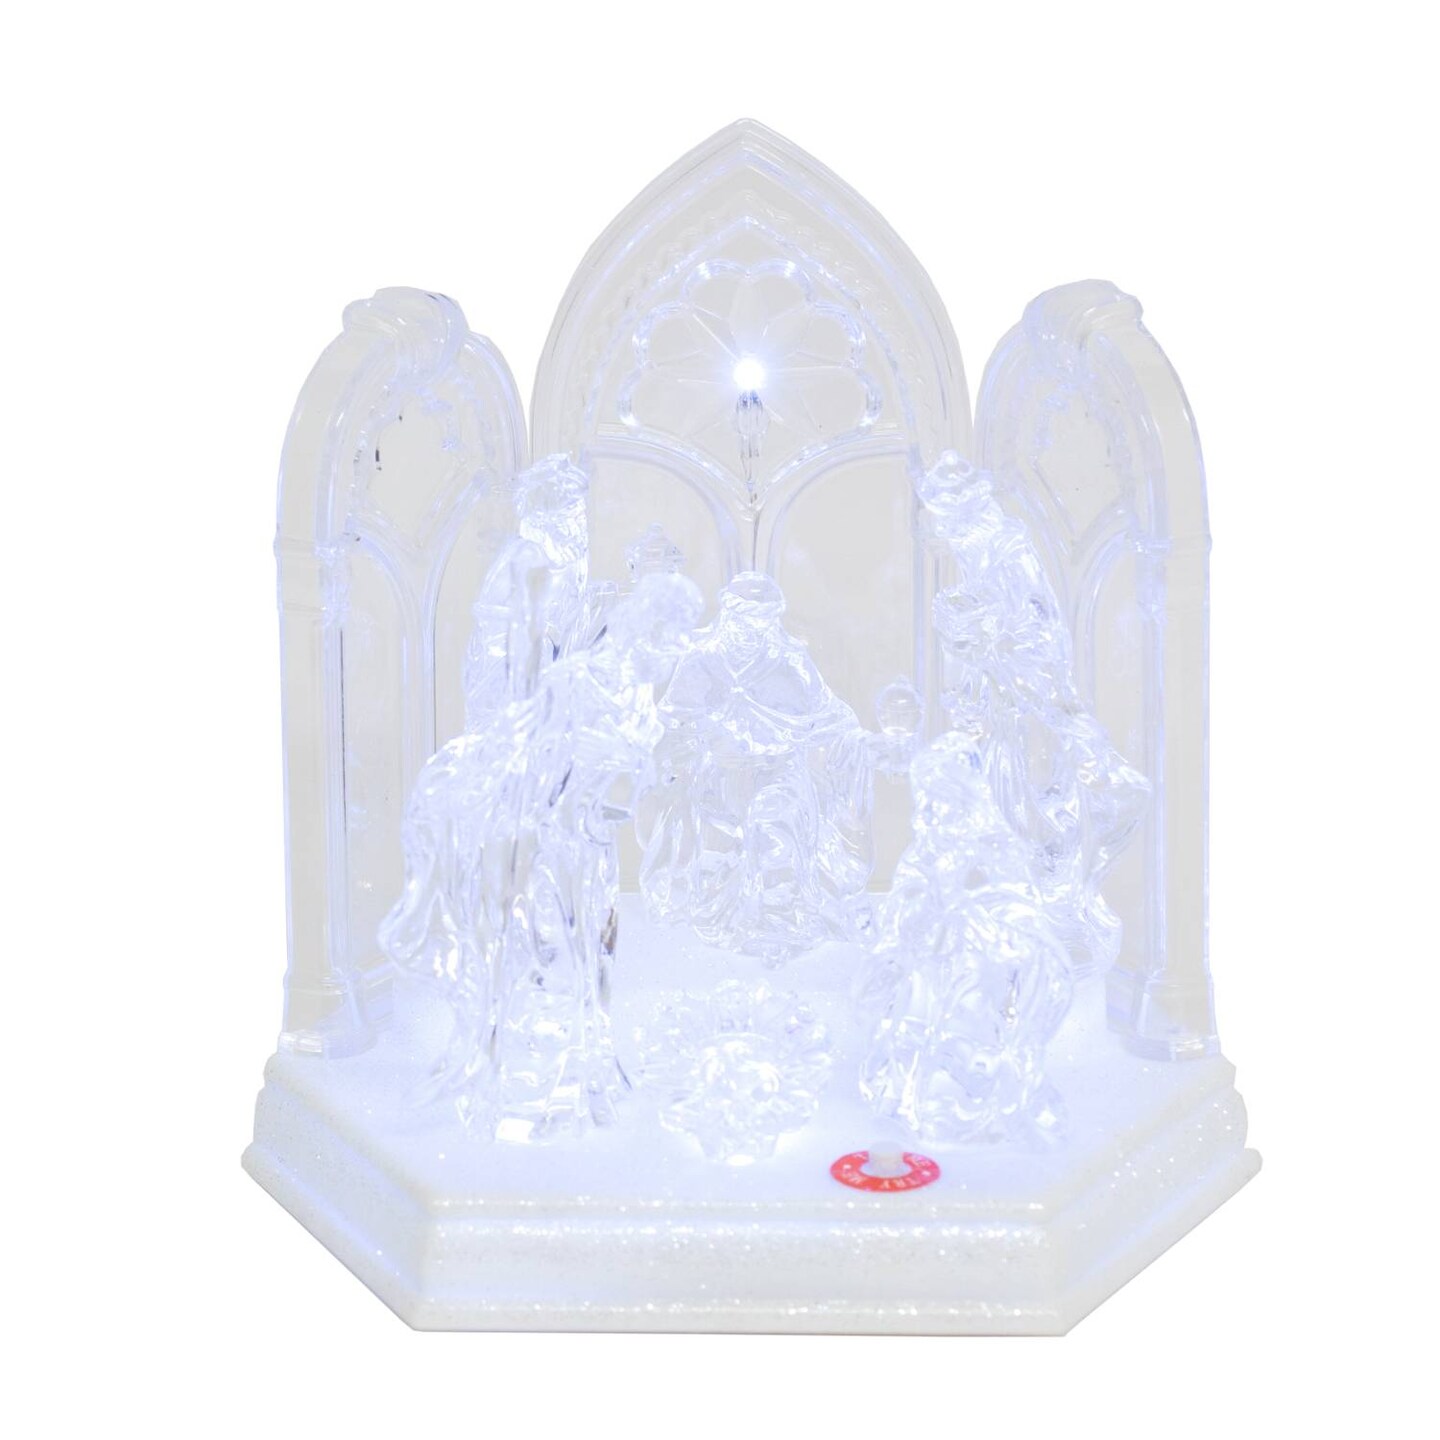 Gerson Lighted Musical Nativity Scene, Cool White Glow, Battery Power LED with Christmas Holiday Tunes, 1 Piece, 7.75 in